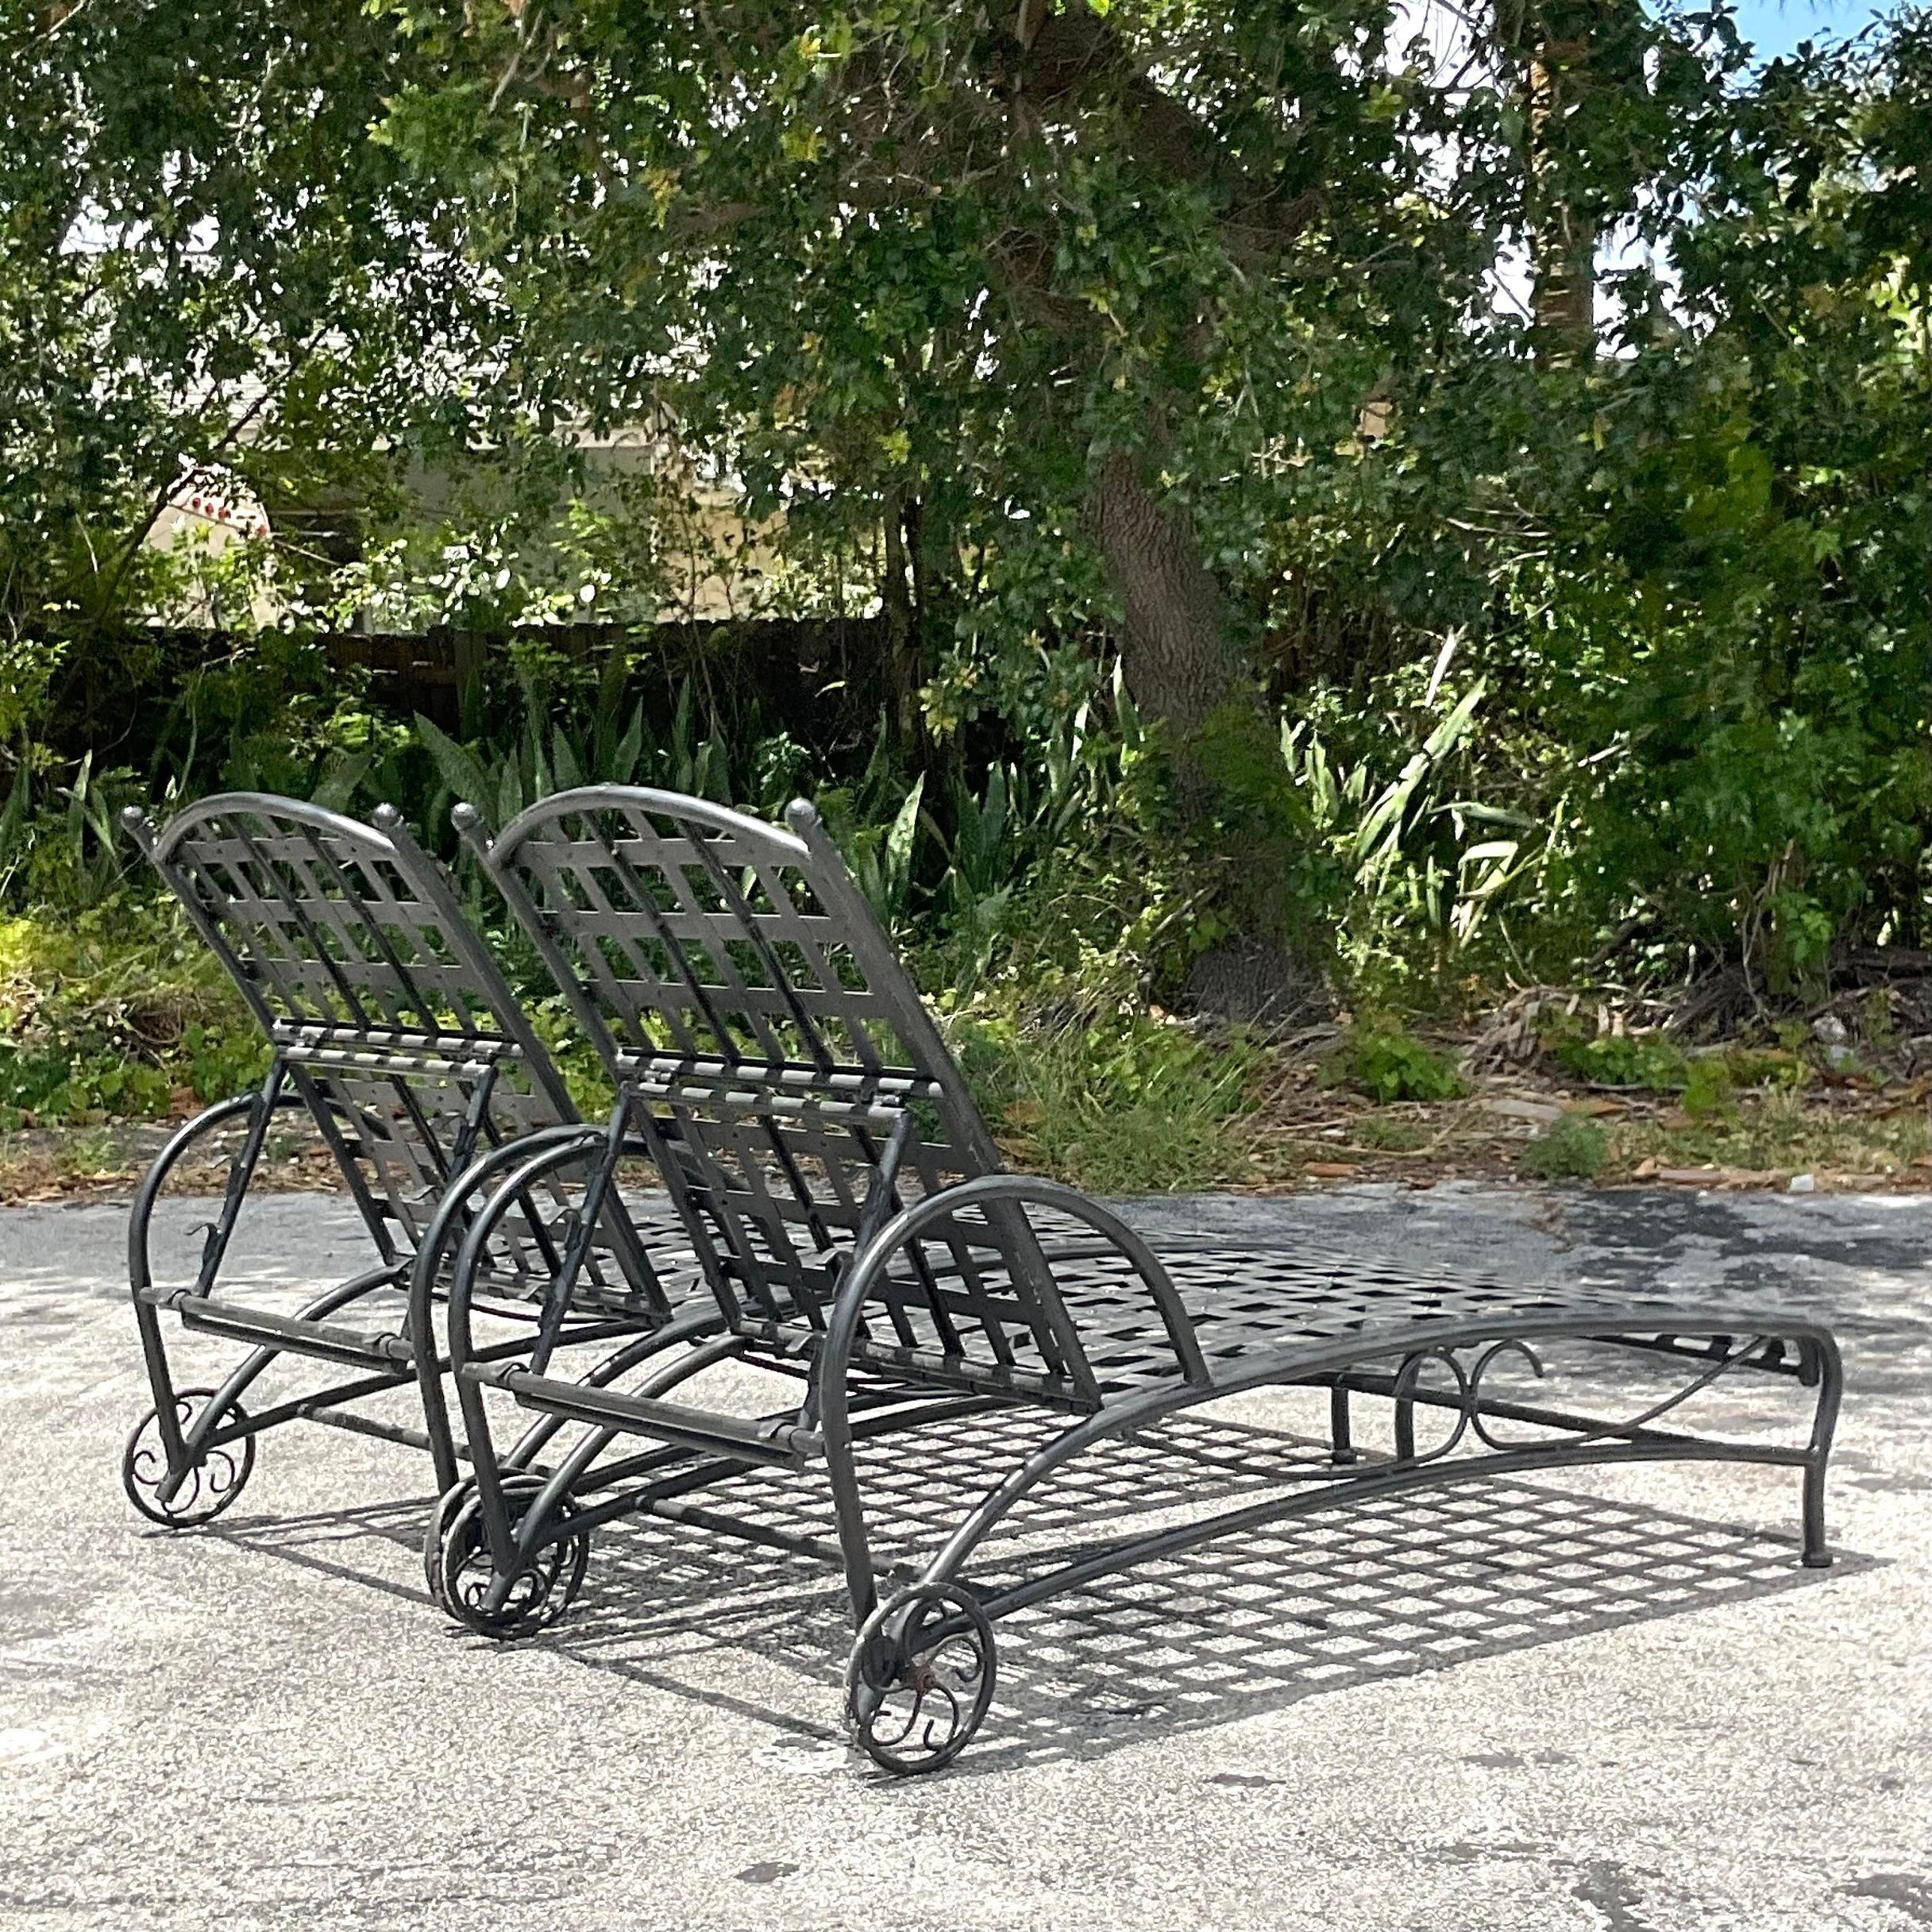 Vintage Boho Wrought Iron Chaise Lounge Chairs - a Pair In Good Condition For Sale In west palm beach, FL